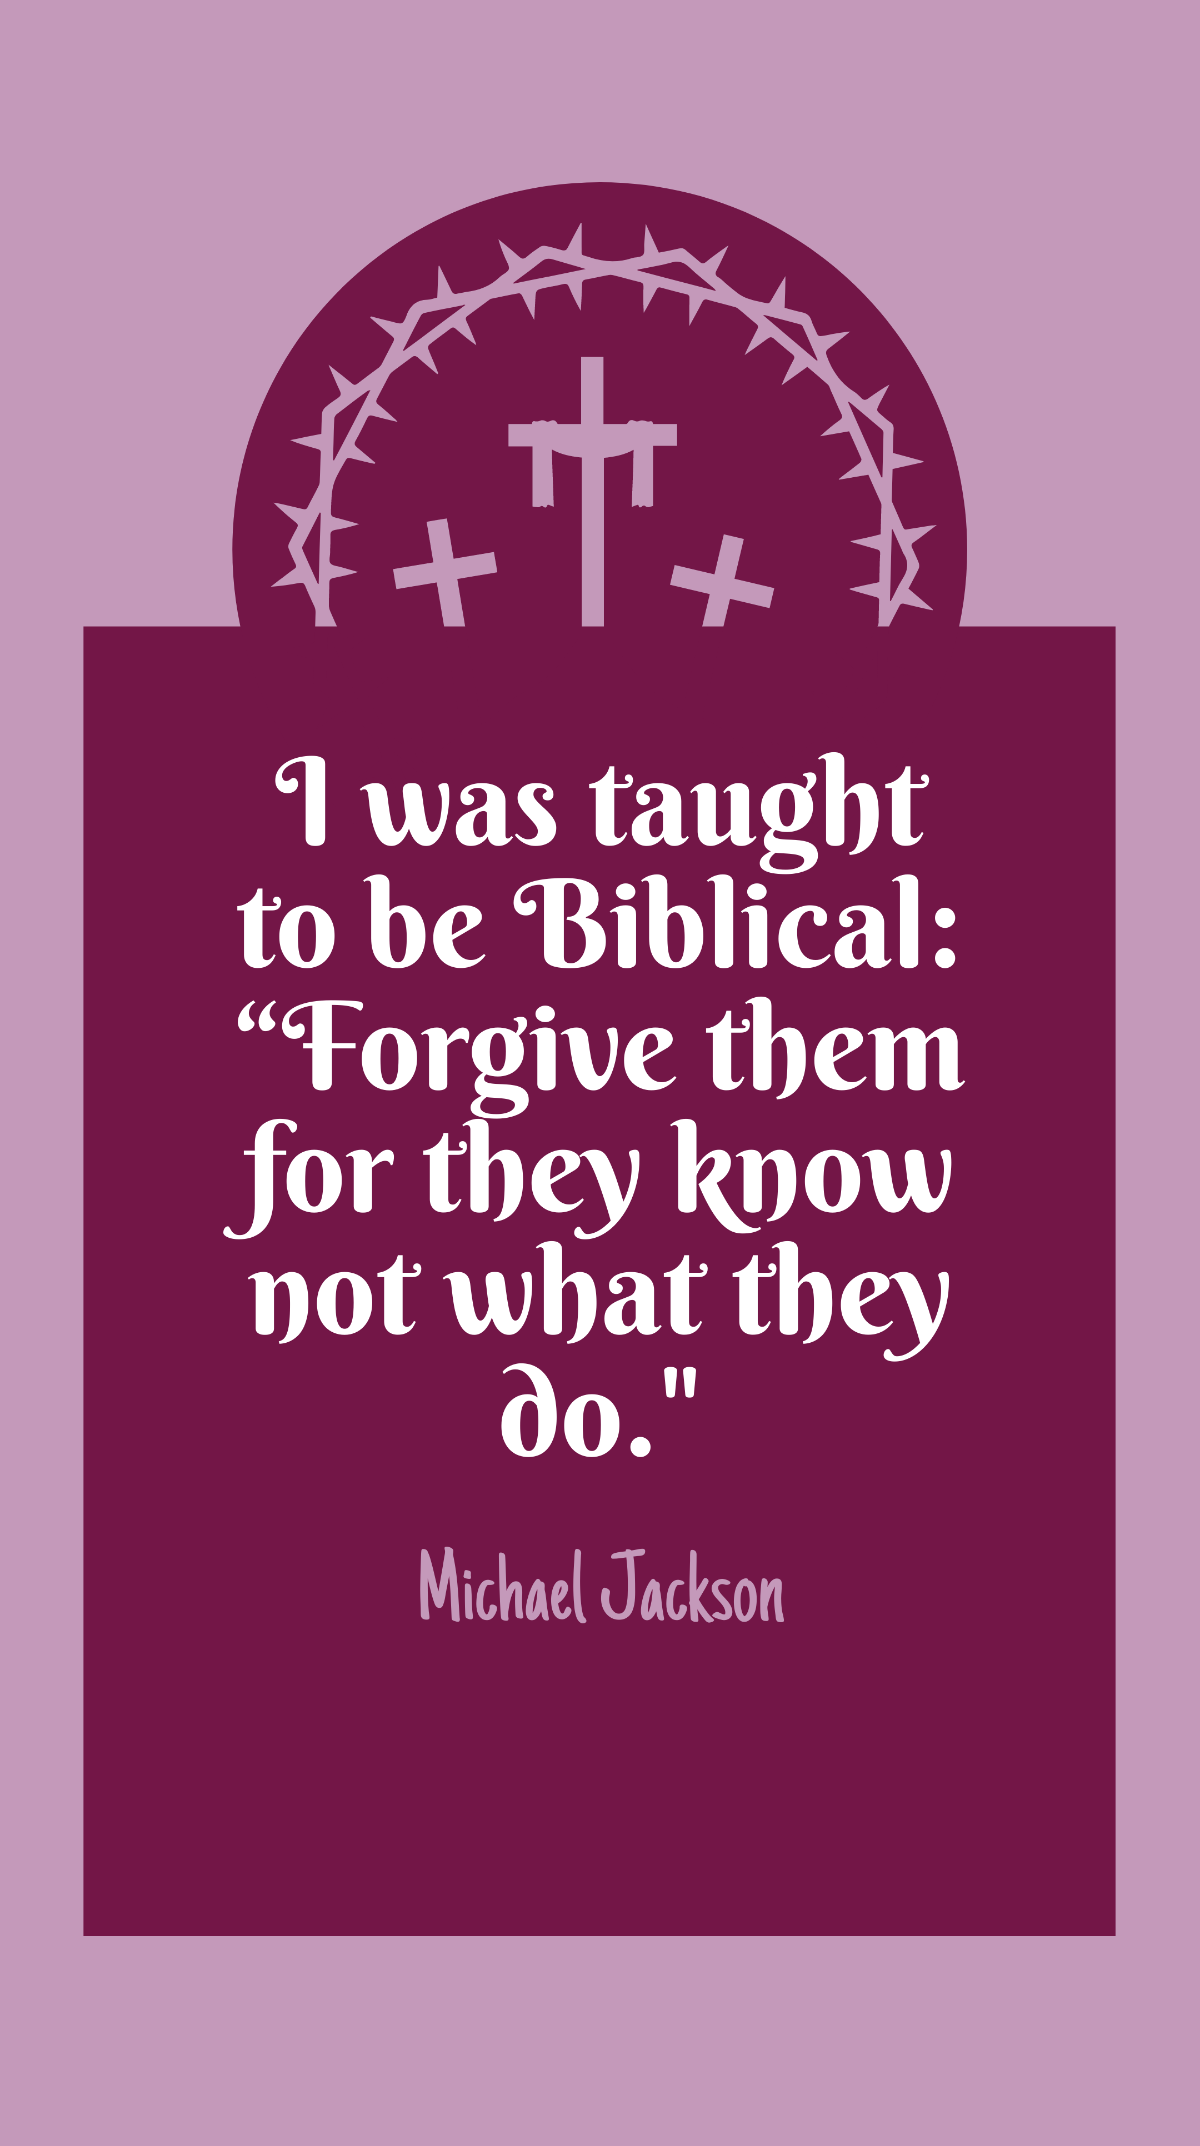 Michael Jackson - I was taught to be Biblical: “Forgive them for they know not what they do. Template